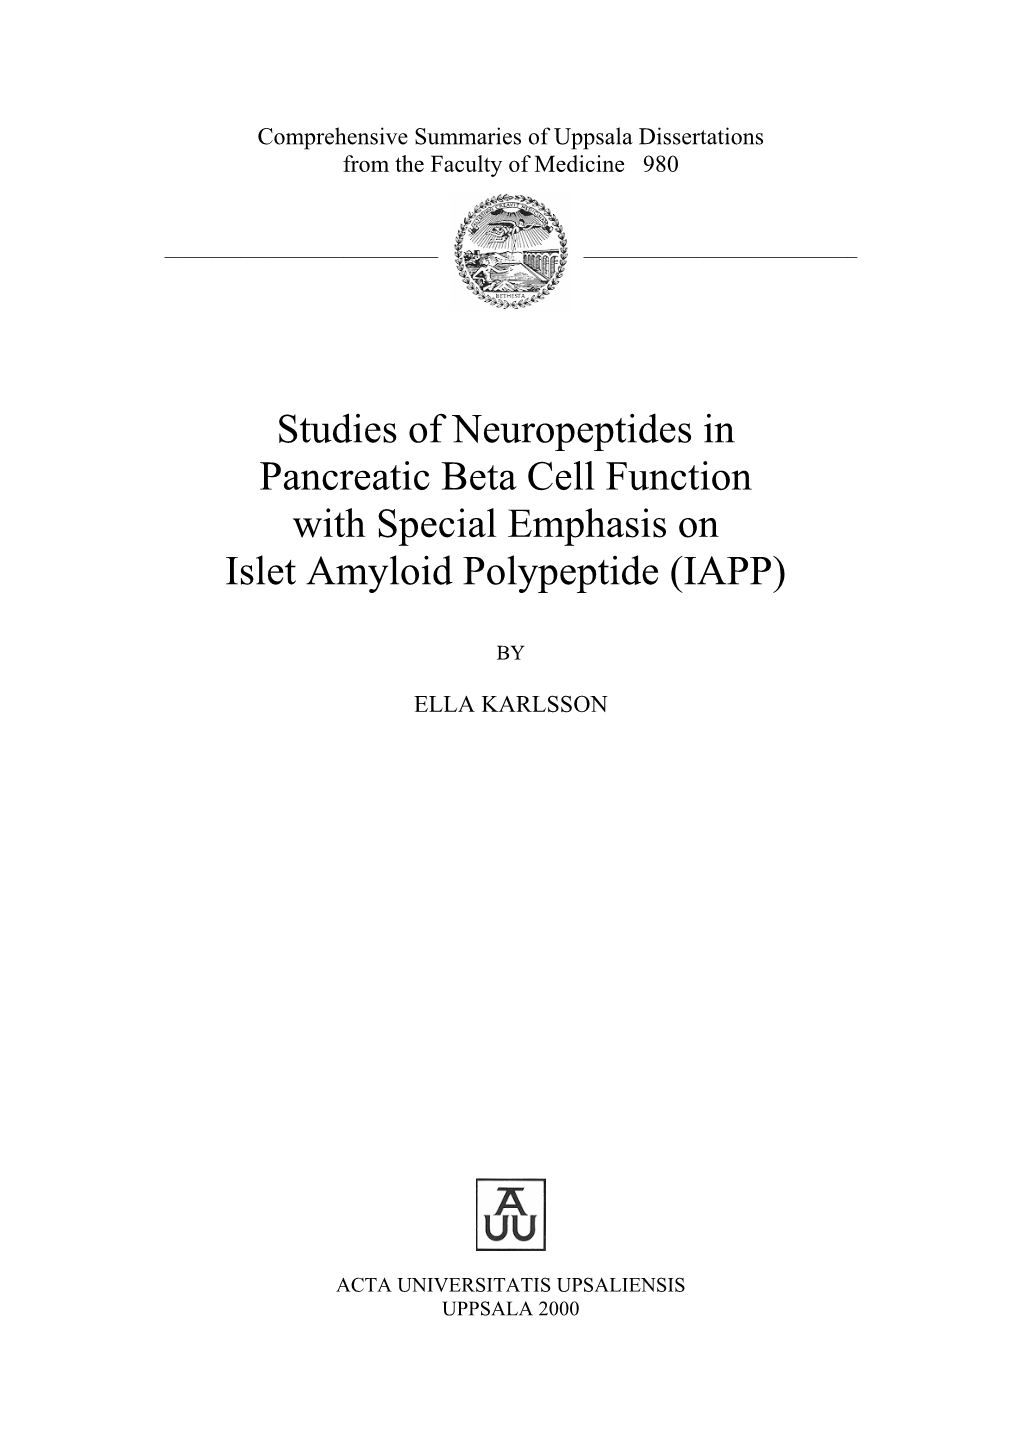 Studies of Neuropeptides in Pancreatic Beta Cell Function with Special Emphasis on Islet Amyloid Polypeptide (IAPP)